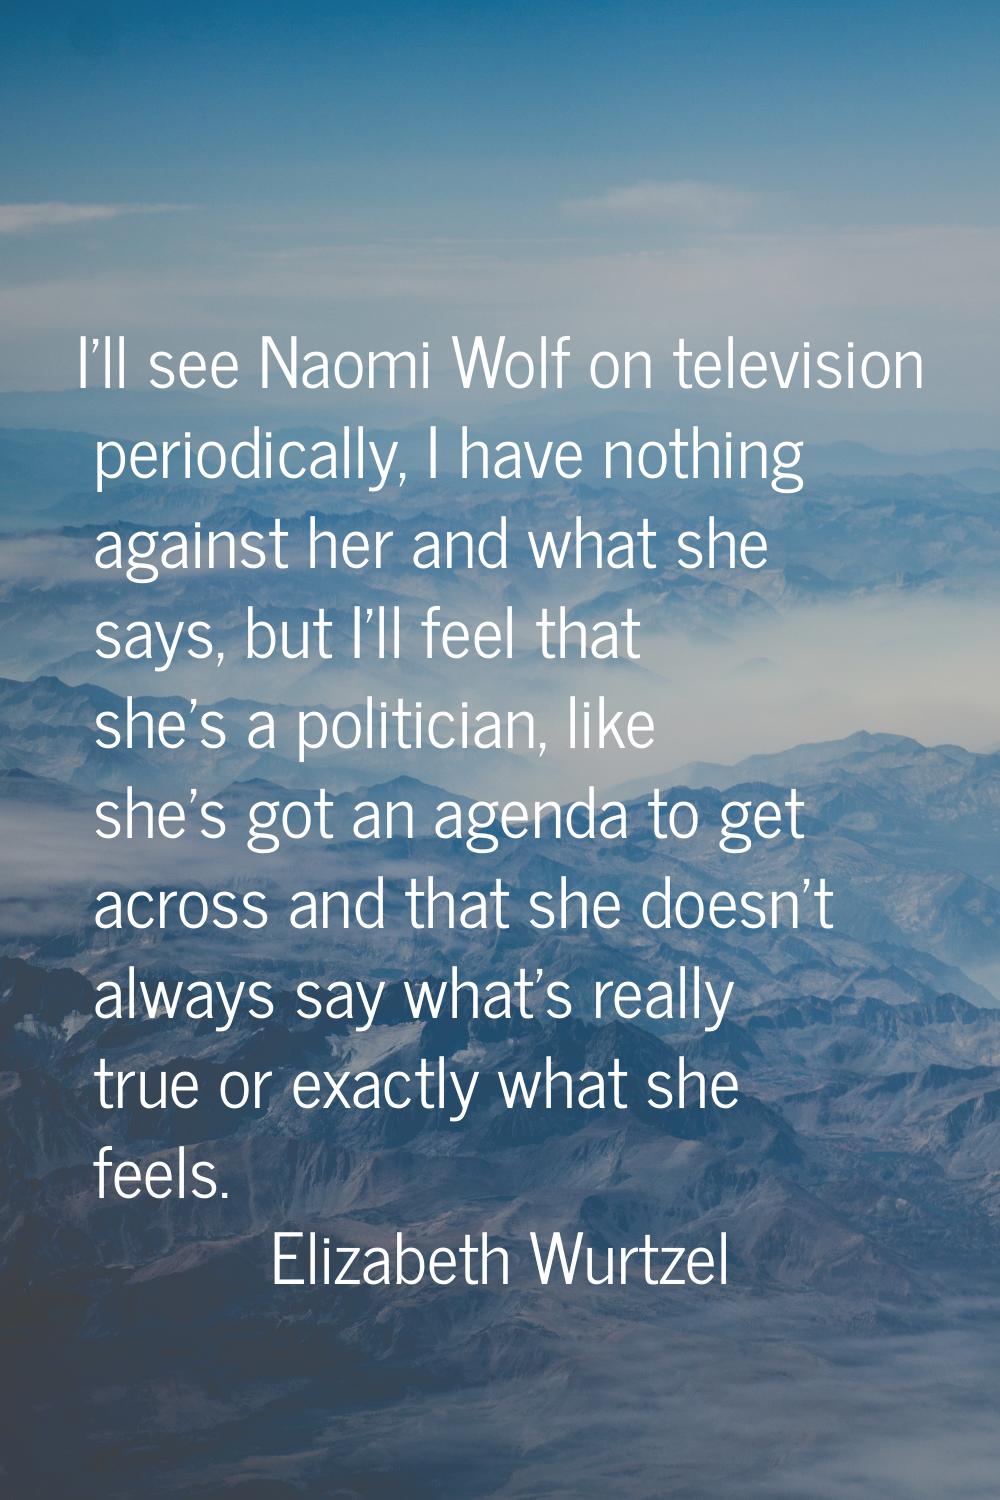 I'll see Naomi Wolf on television periodically, I have nothing against her and what she says, but I